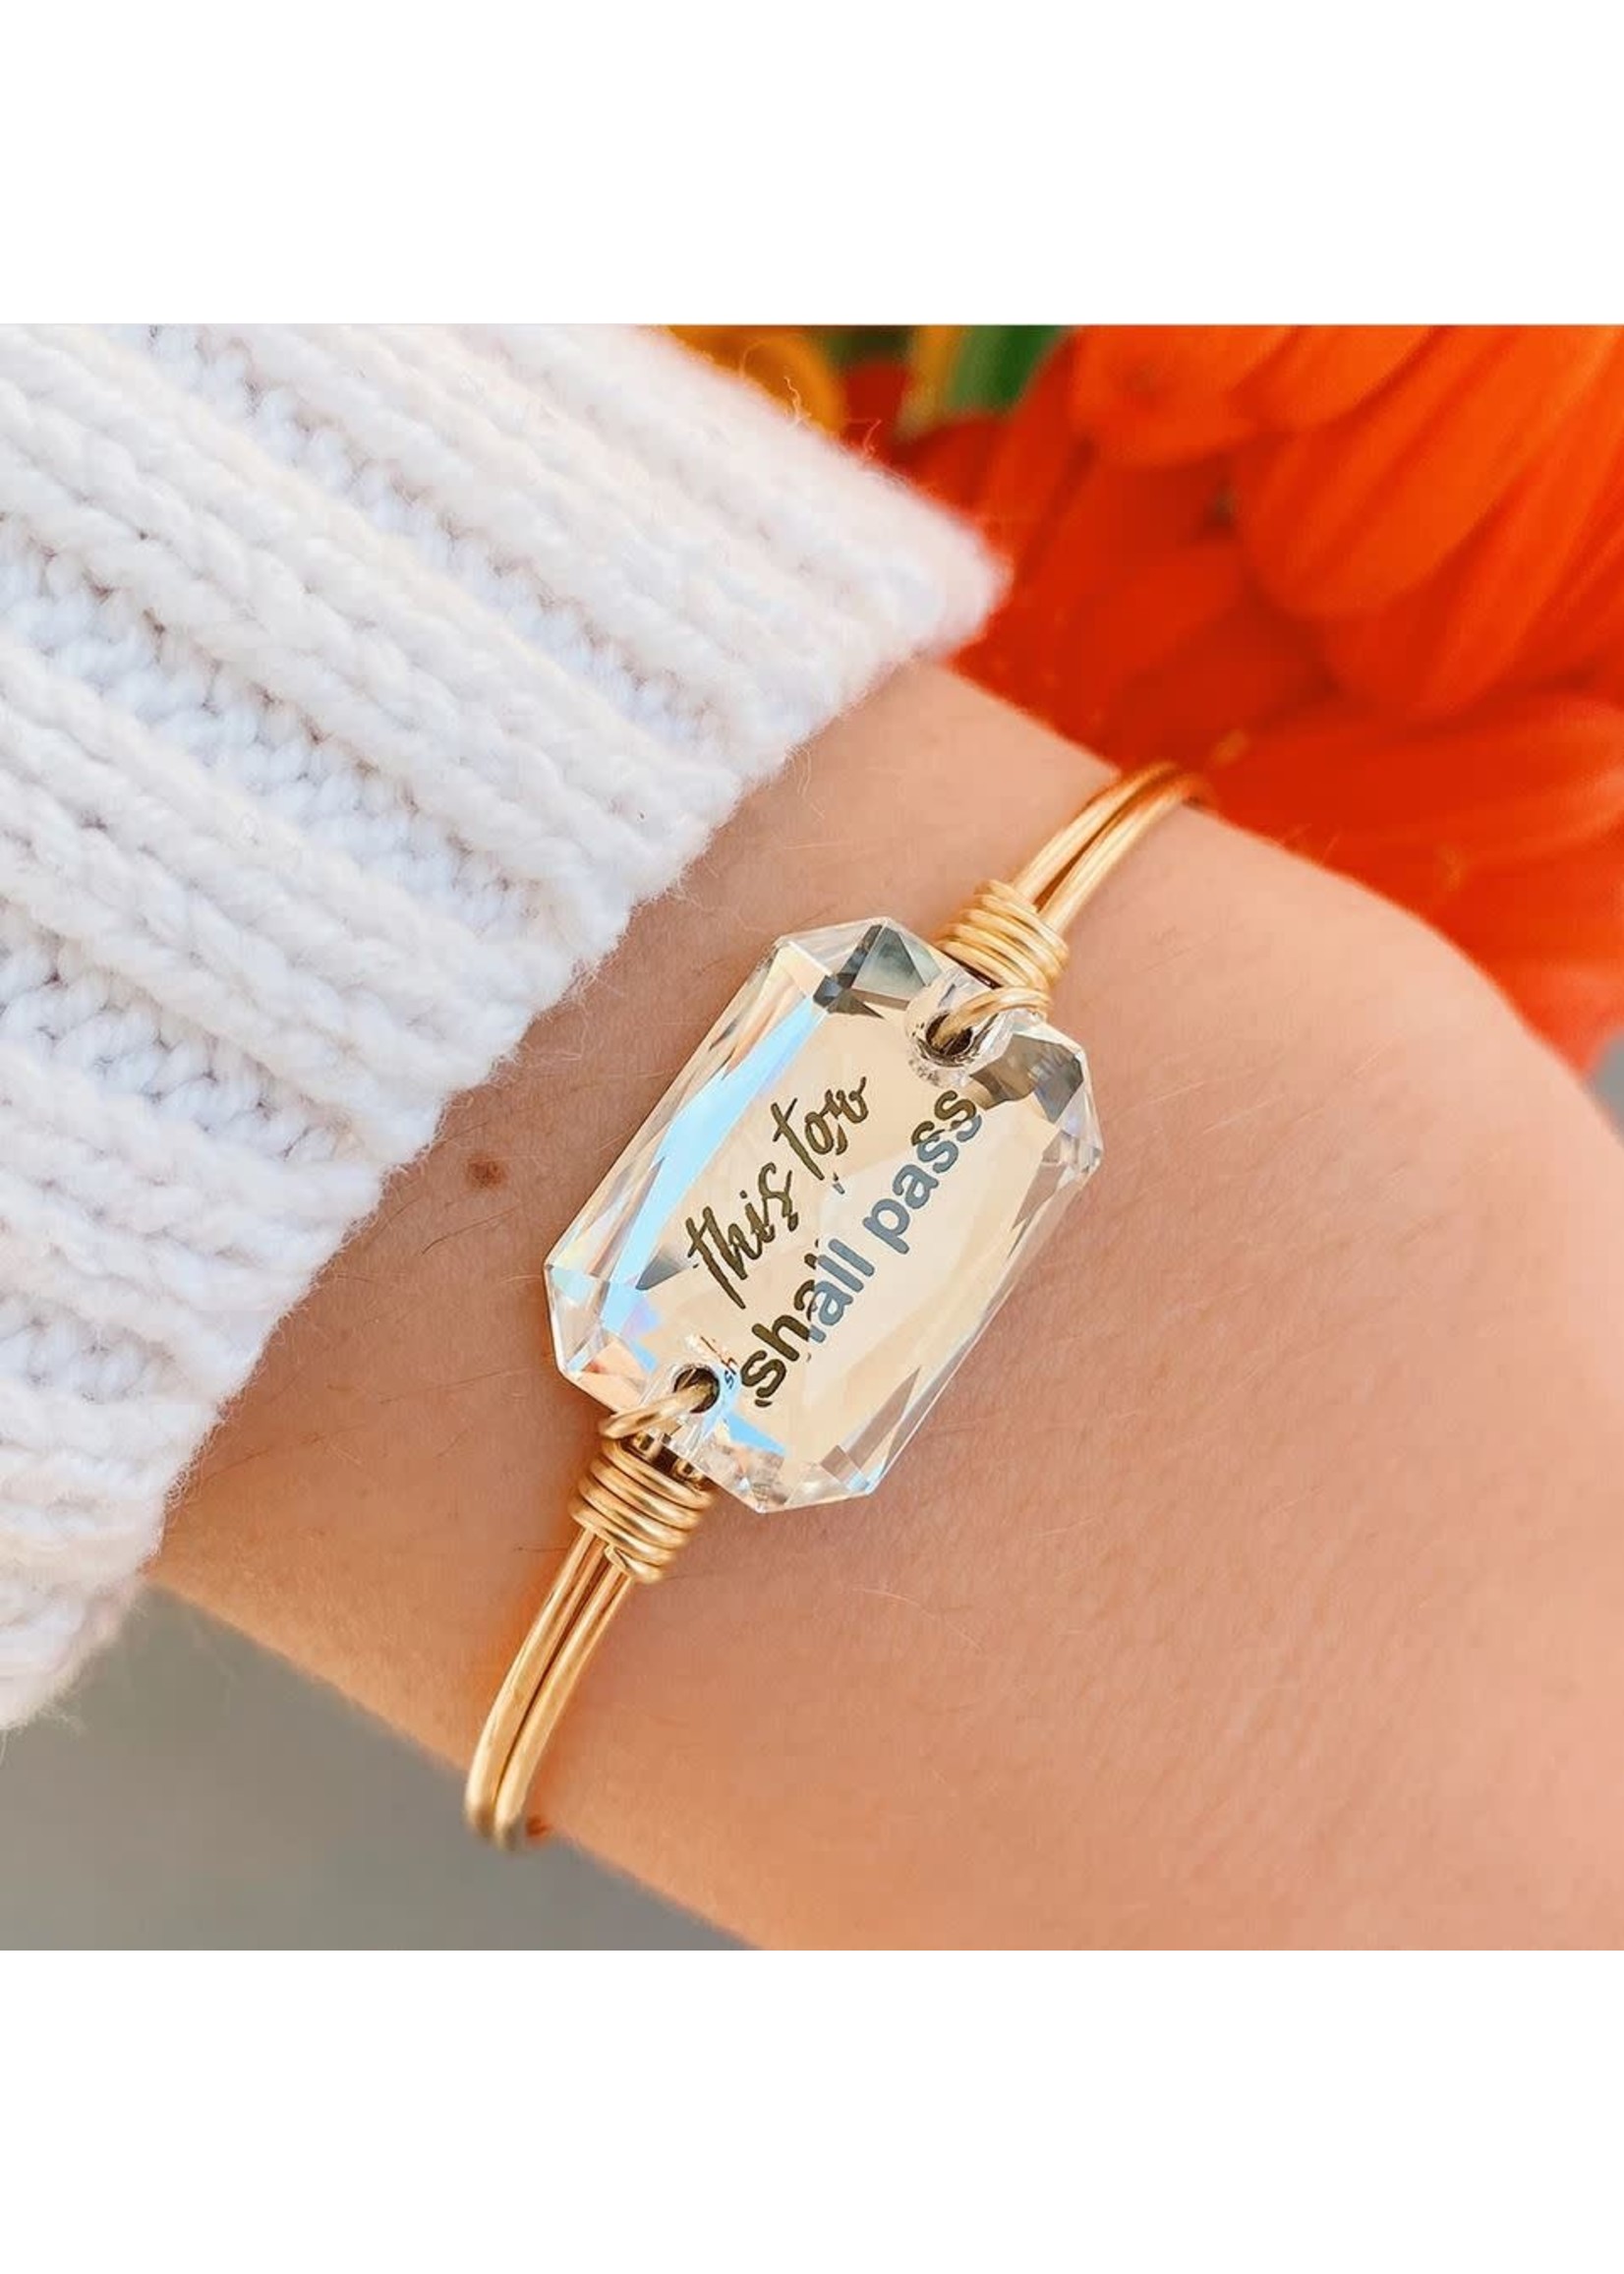 Luca & Danni This Too Shall Pass Bracelet